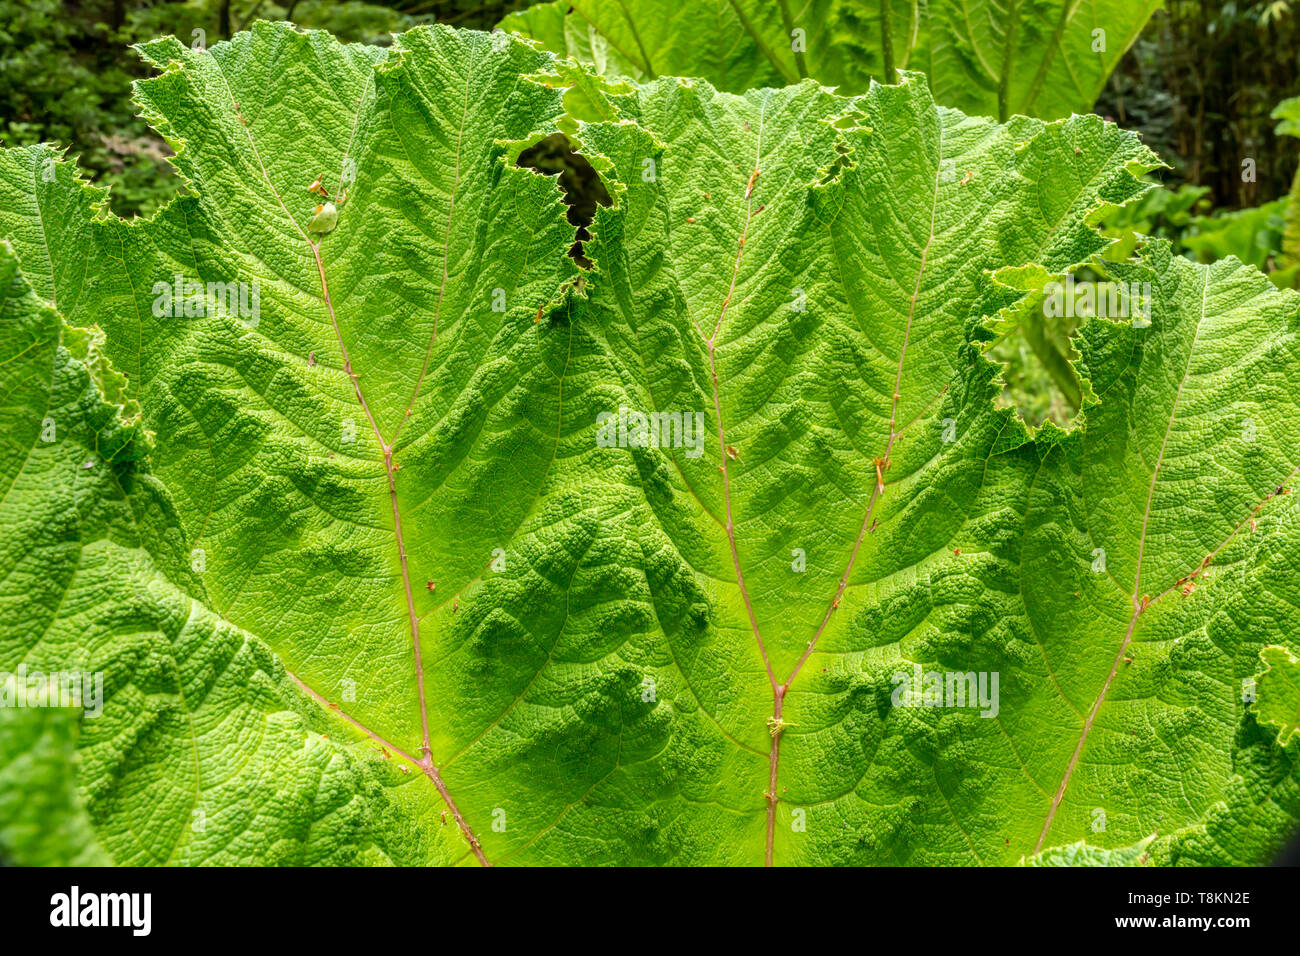 Colour photograph in landscape format of Giant Rhubarb Gunnera leaf (Gunneraceae) close-up. Branksome gardens, Poole, Dorset, England. Stock Photo